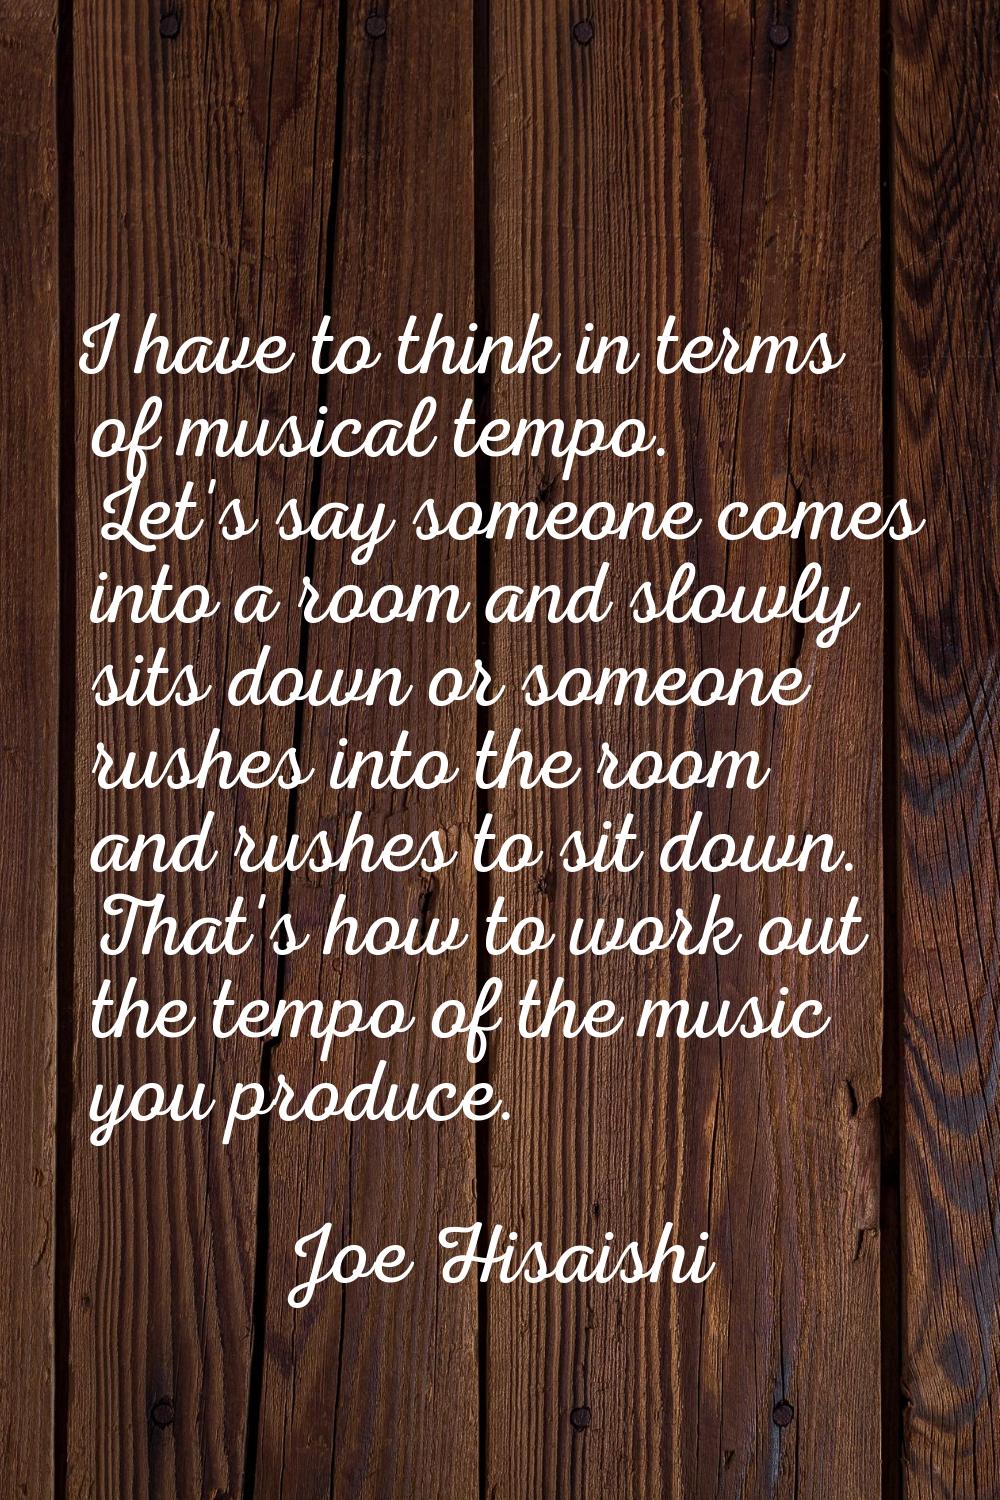 I have to think in terms of musical tempo. Let's say someone comes into a room and slowly sits down